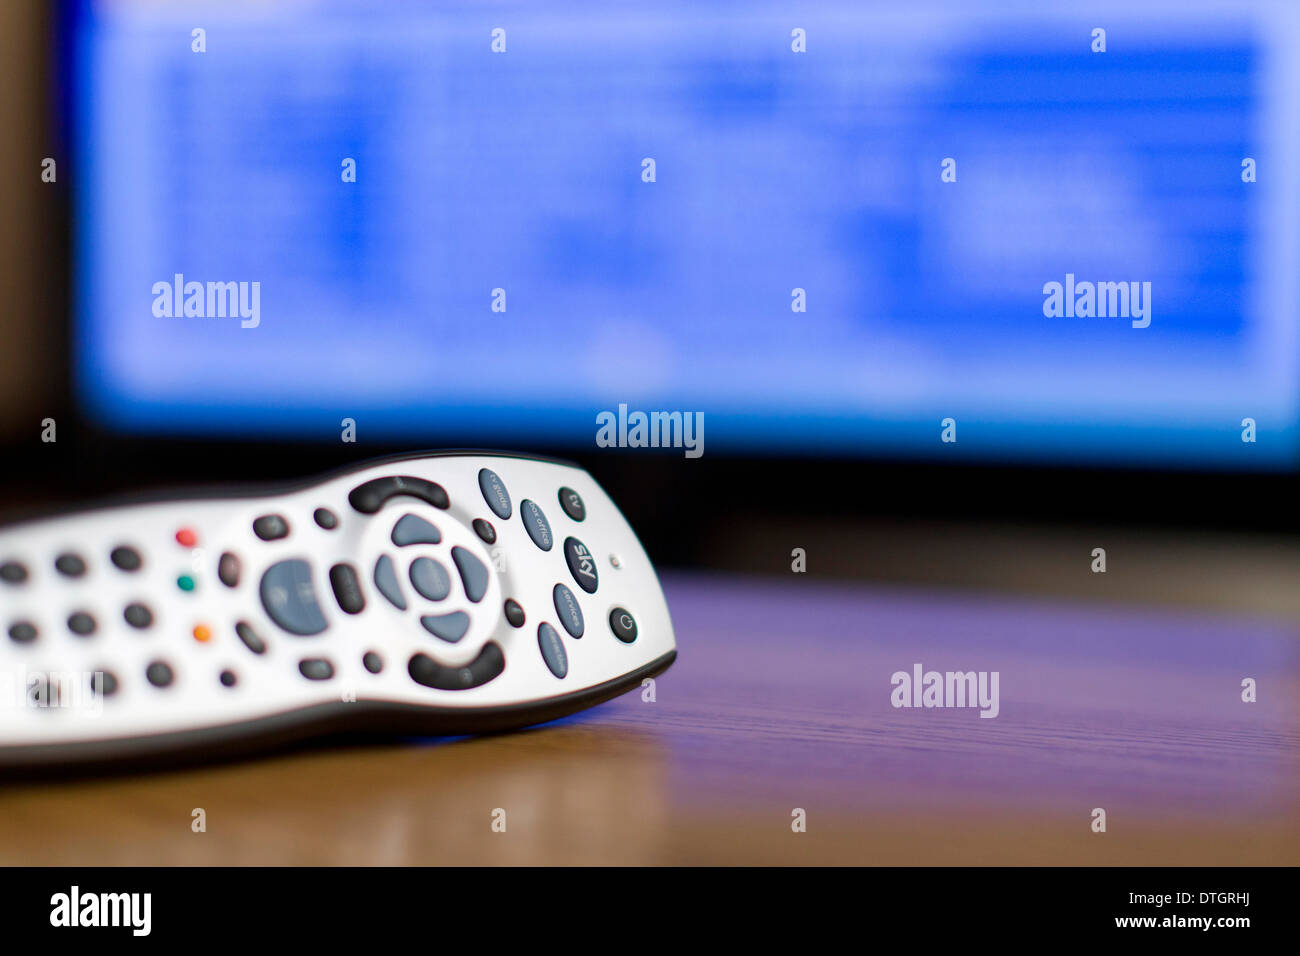 A Sky television remote control is pictured on a table at home. Stock Photo